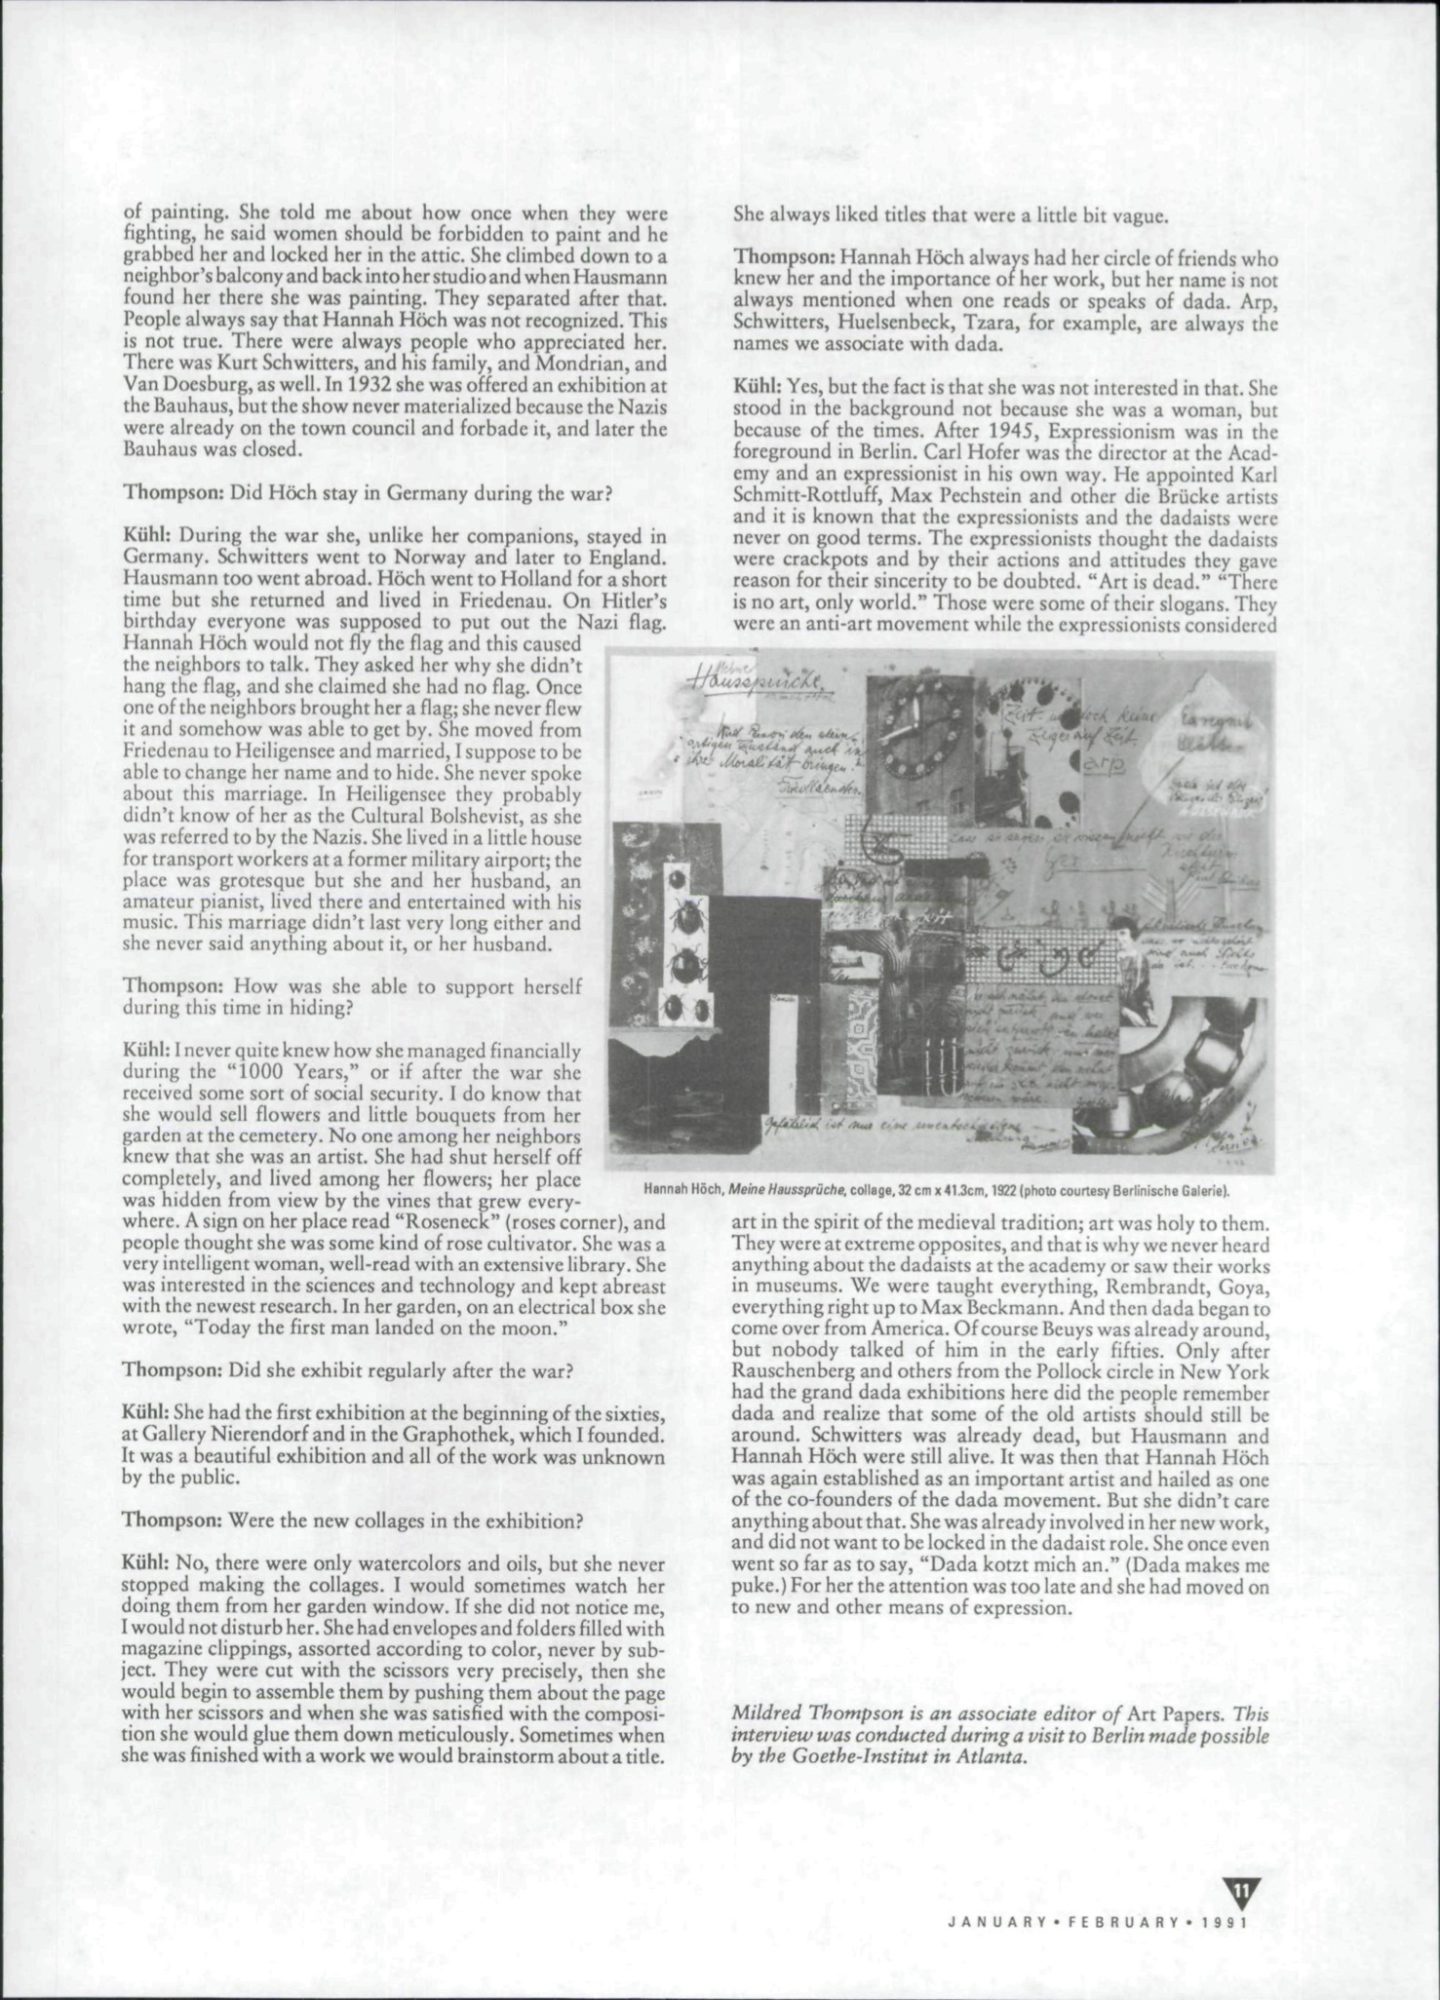 Scan of interview between Mildred Thompson and Siegfried Kühl.